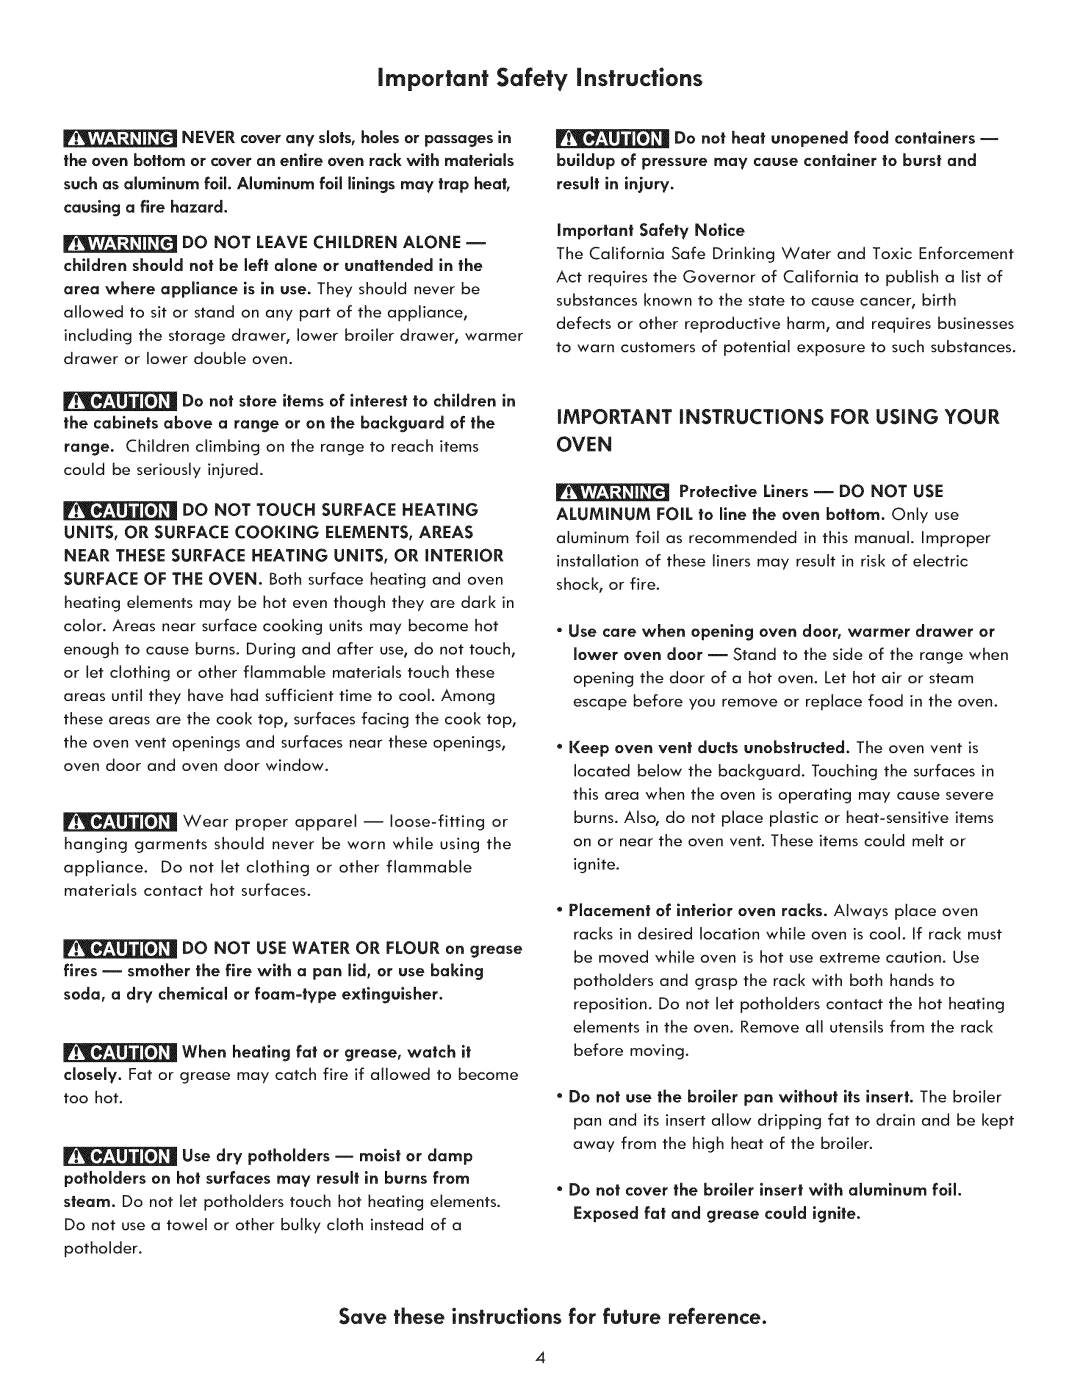 Kenmore 970-5984 manual Irnportant Safety Instructions, Save these instructions for future reference, Oven, ignite 